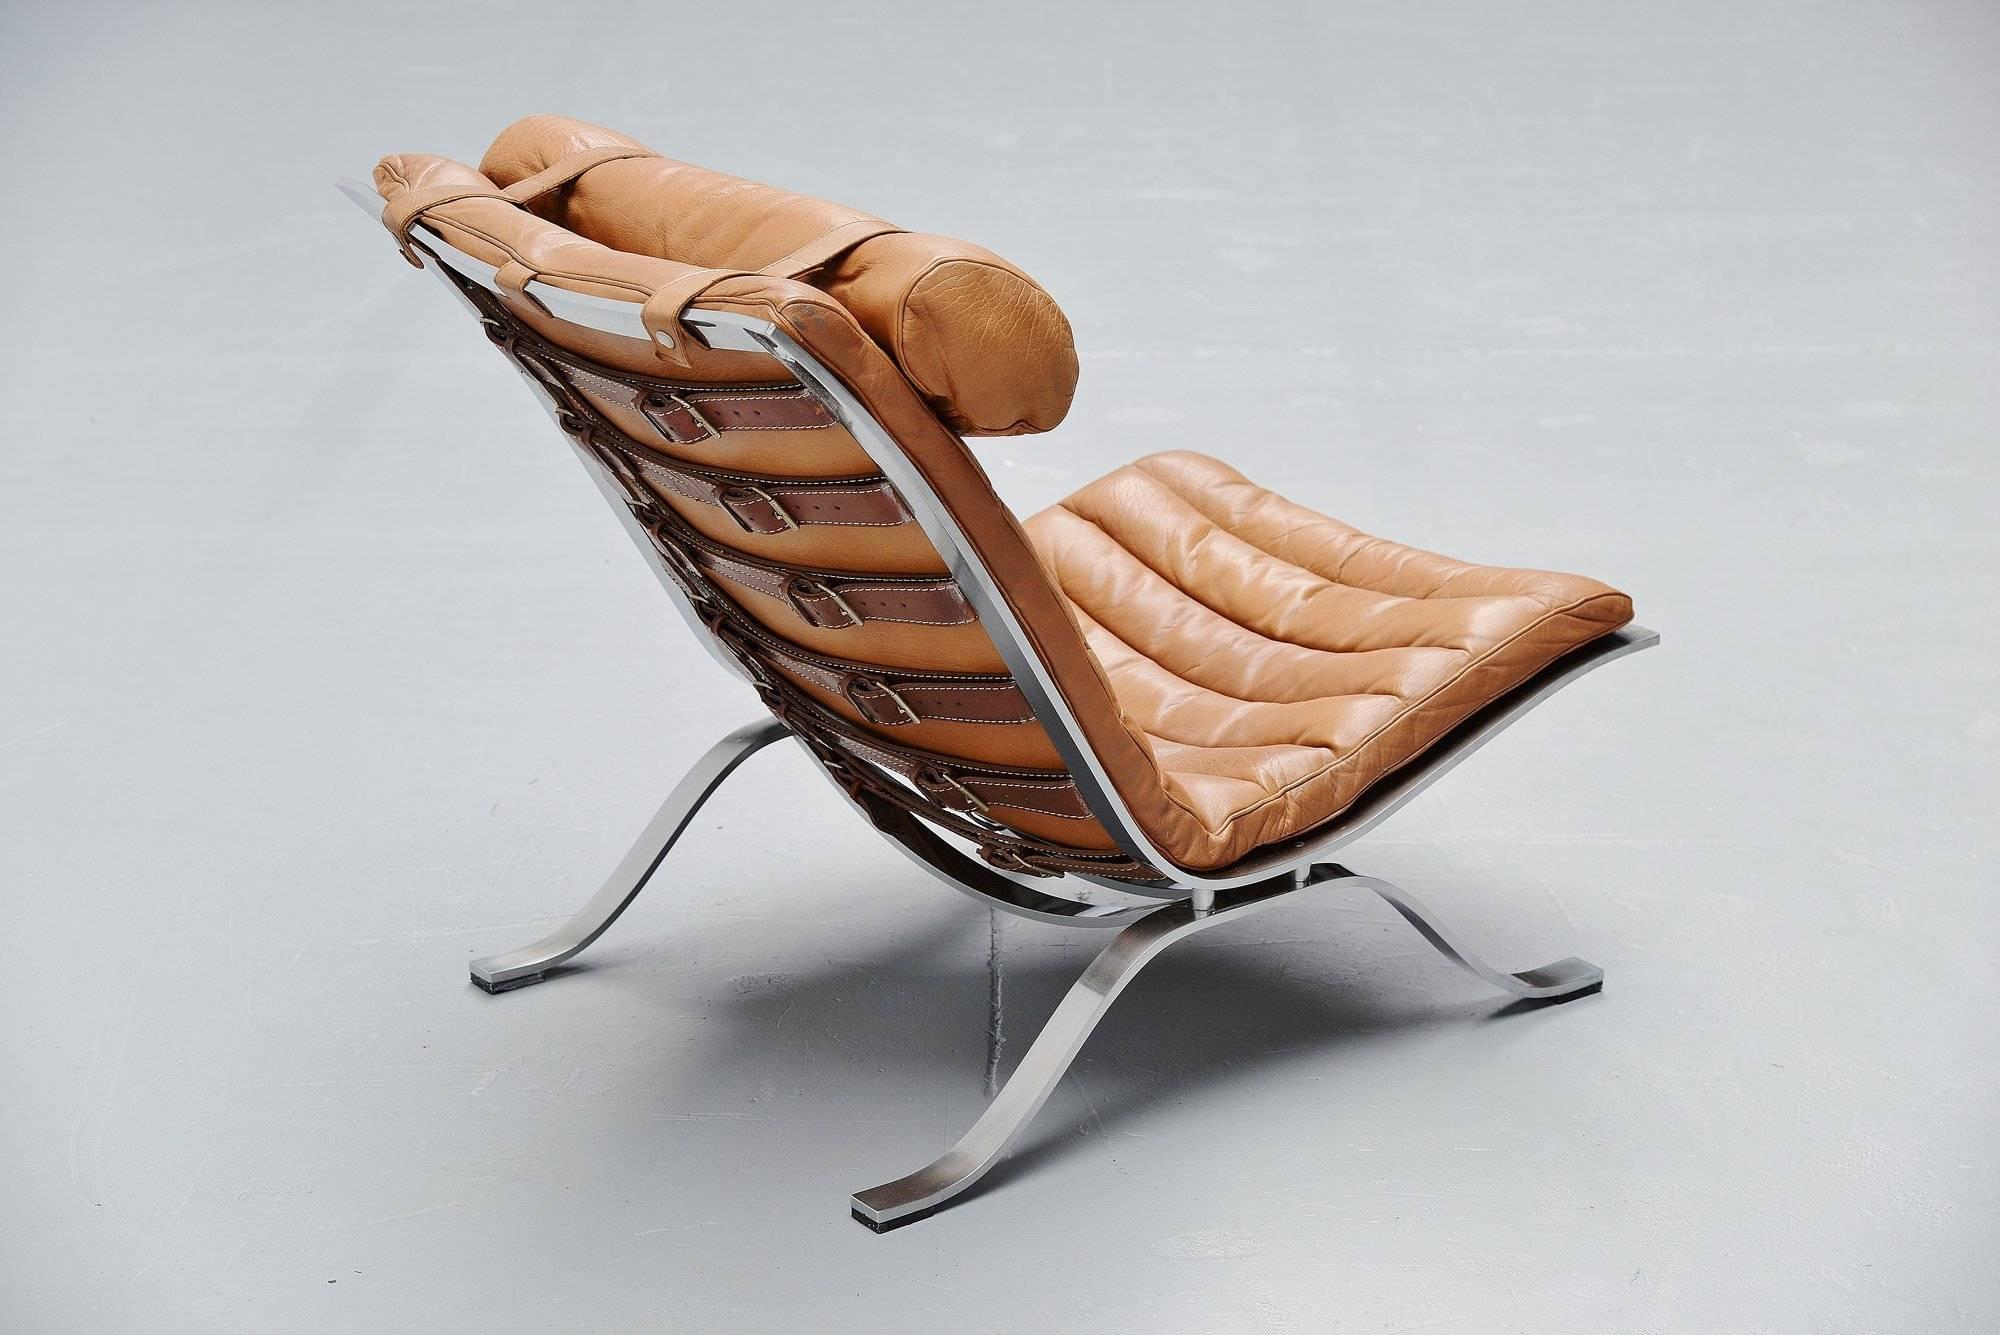 Beautiful and very comfortable lounge chair designed by Arne Norell and manufactured by Norell Mobler AB, Sweden 1966. This chair has a solid steel chrome-plated frame, leather belts to support the natural leather cushion. The chair is in very good